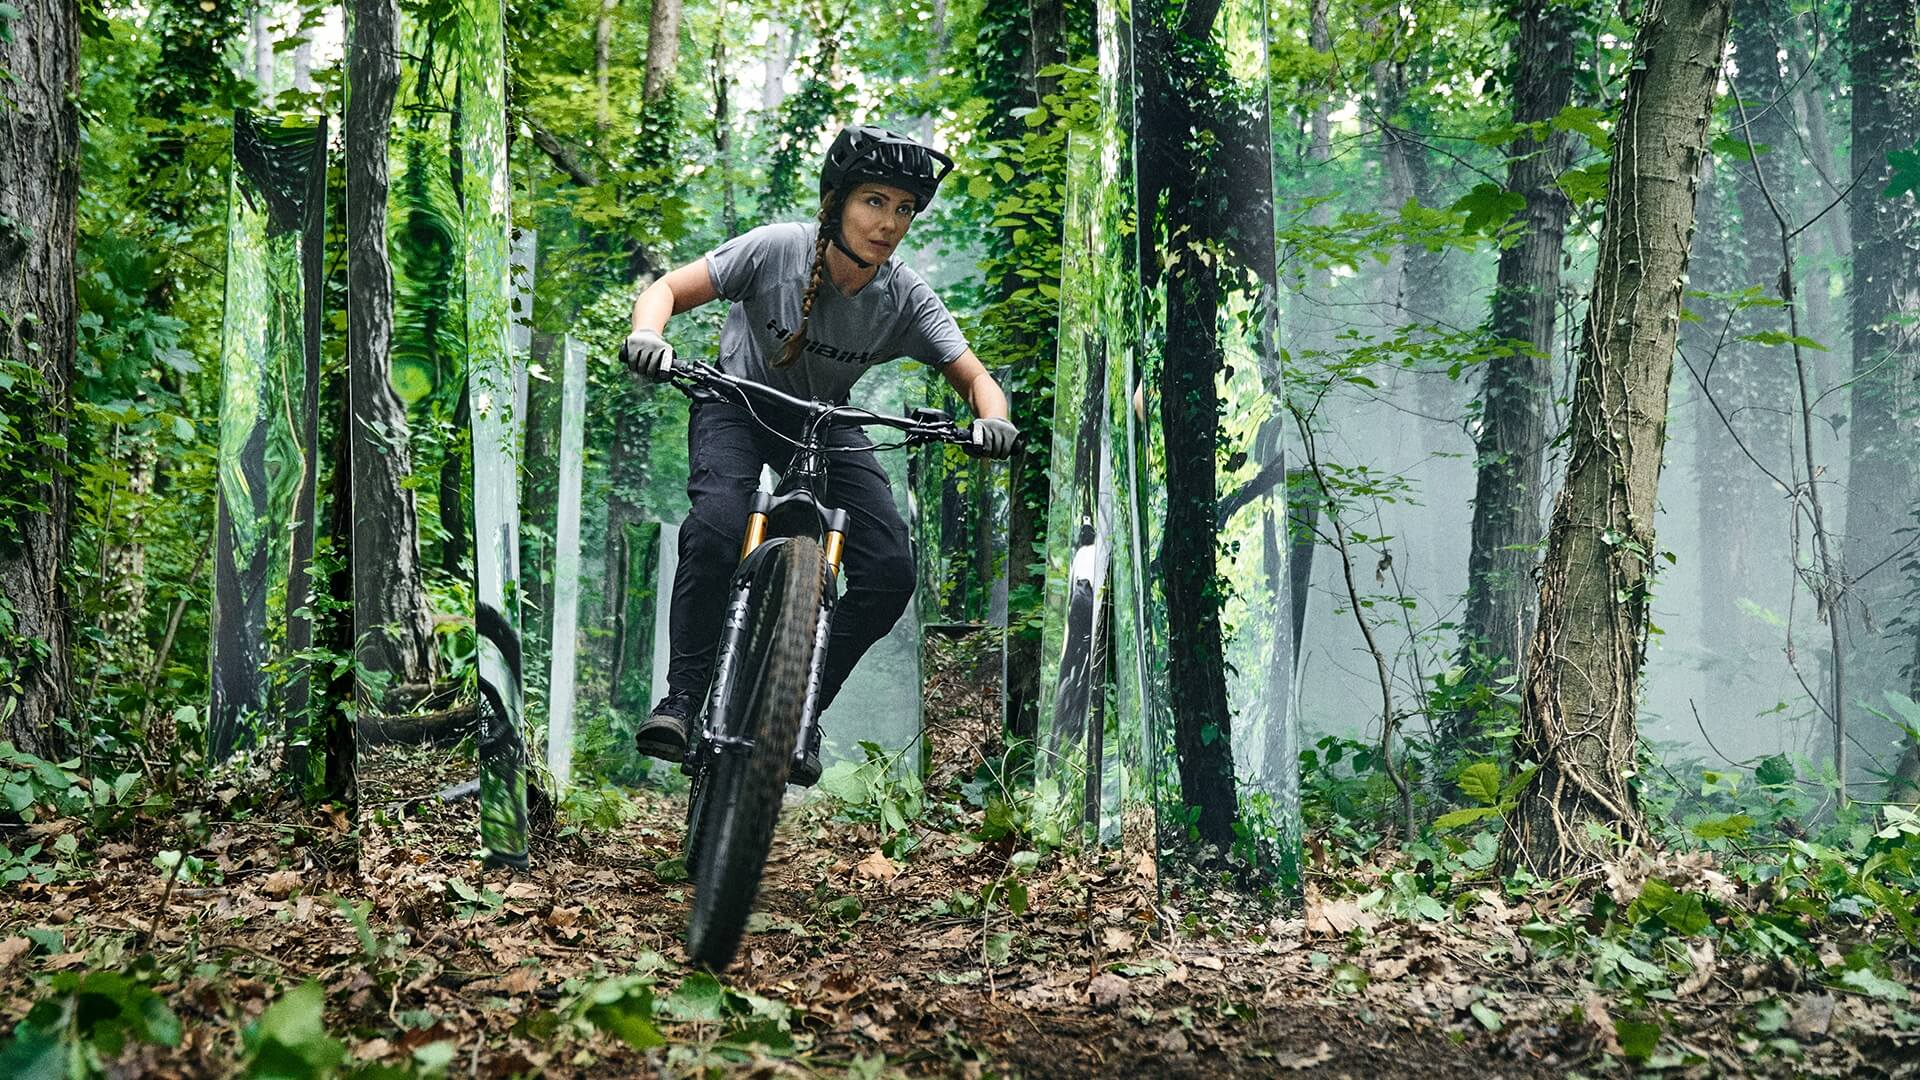 Celine riding through a futuristic forest with mirrors on her Haibike AllMtn 7 eMTB